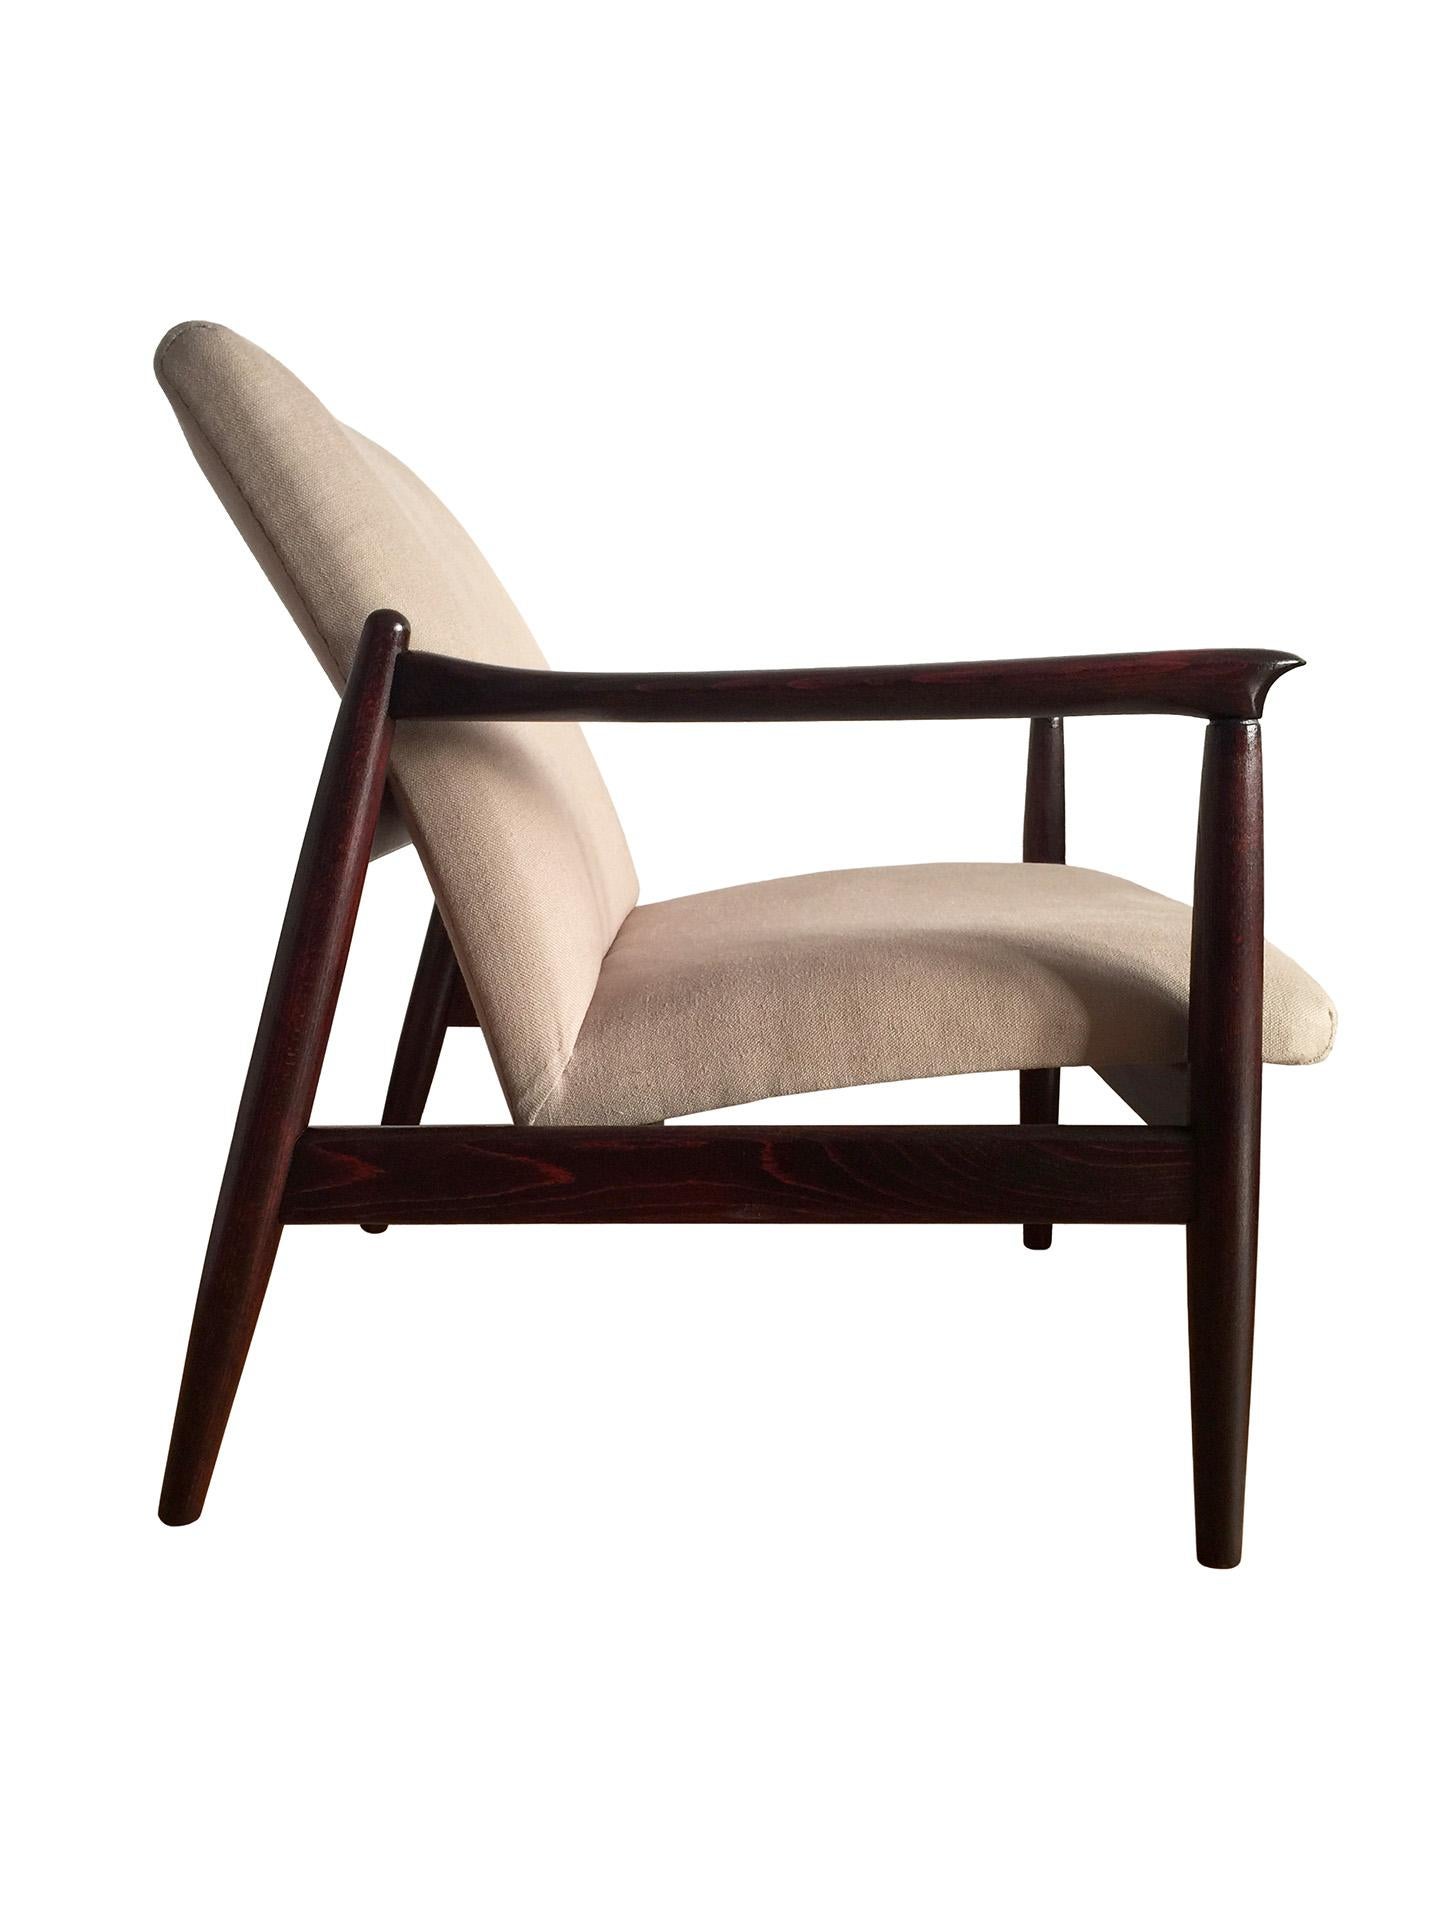 One of the icon of Polish midcentury design, model GFM-64 armchair, designed by Edmund Homa, has been manufactured by Goscinska Furniture Factory in Poland in the 1960s. The structure is made of solid beechwood in a warm palisander color, finished